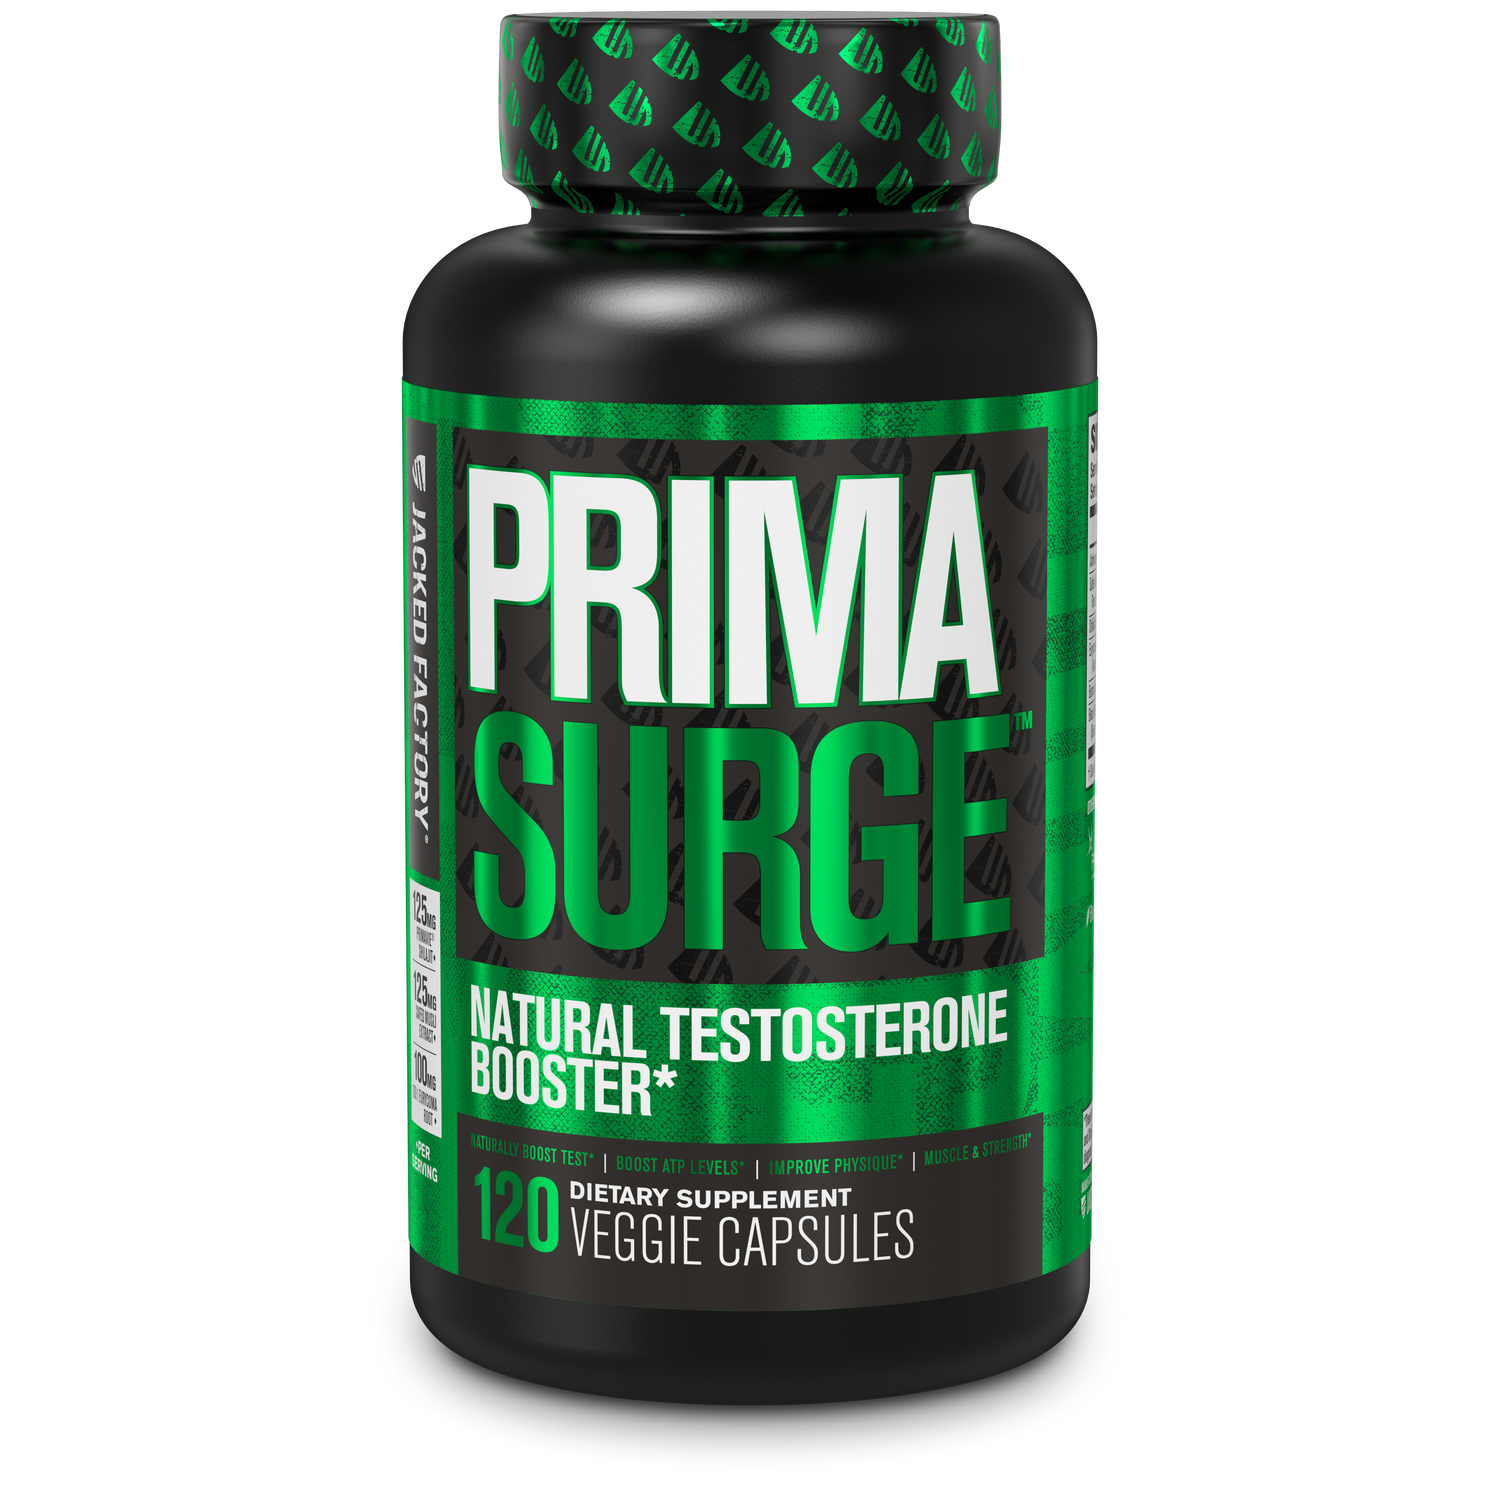 Jacked Factory's Primasurge (120 veggie capsules) in a black bottle with green label